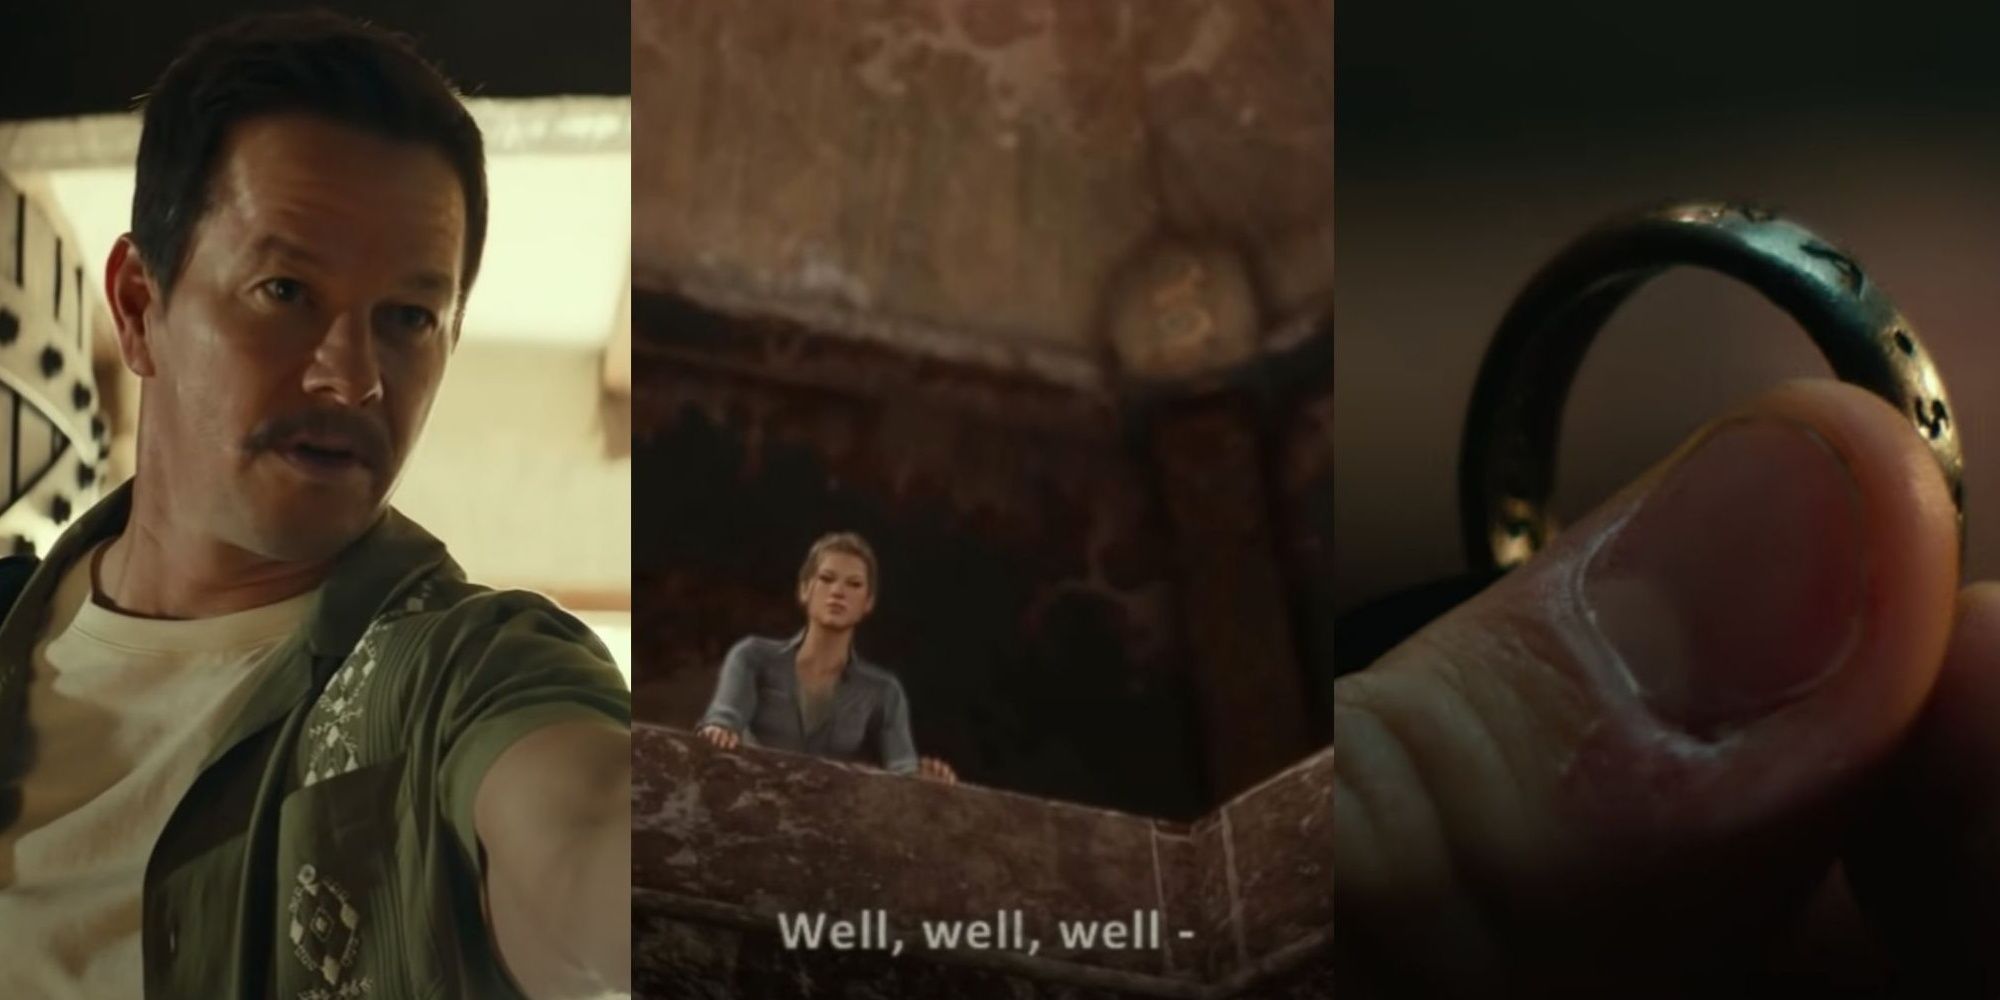 Uncharted' movie surprise: Did you catch that wild cameo?